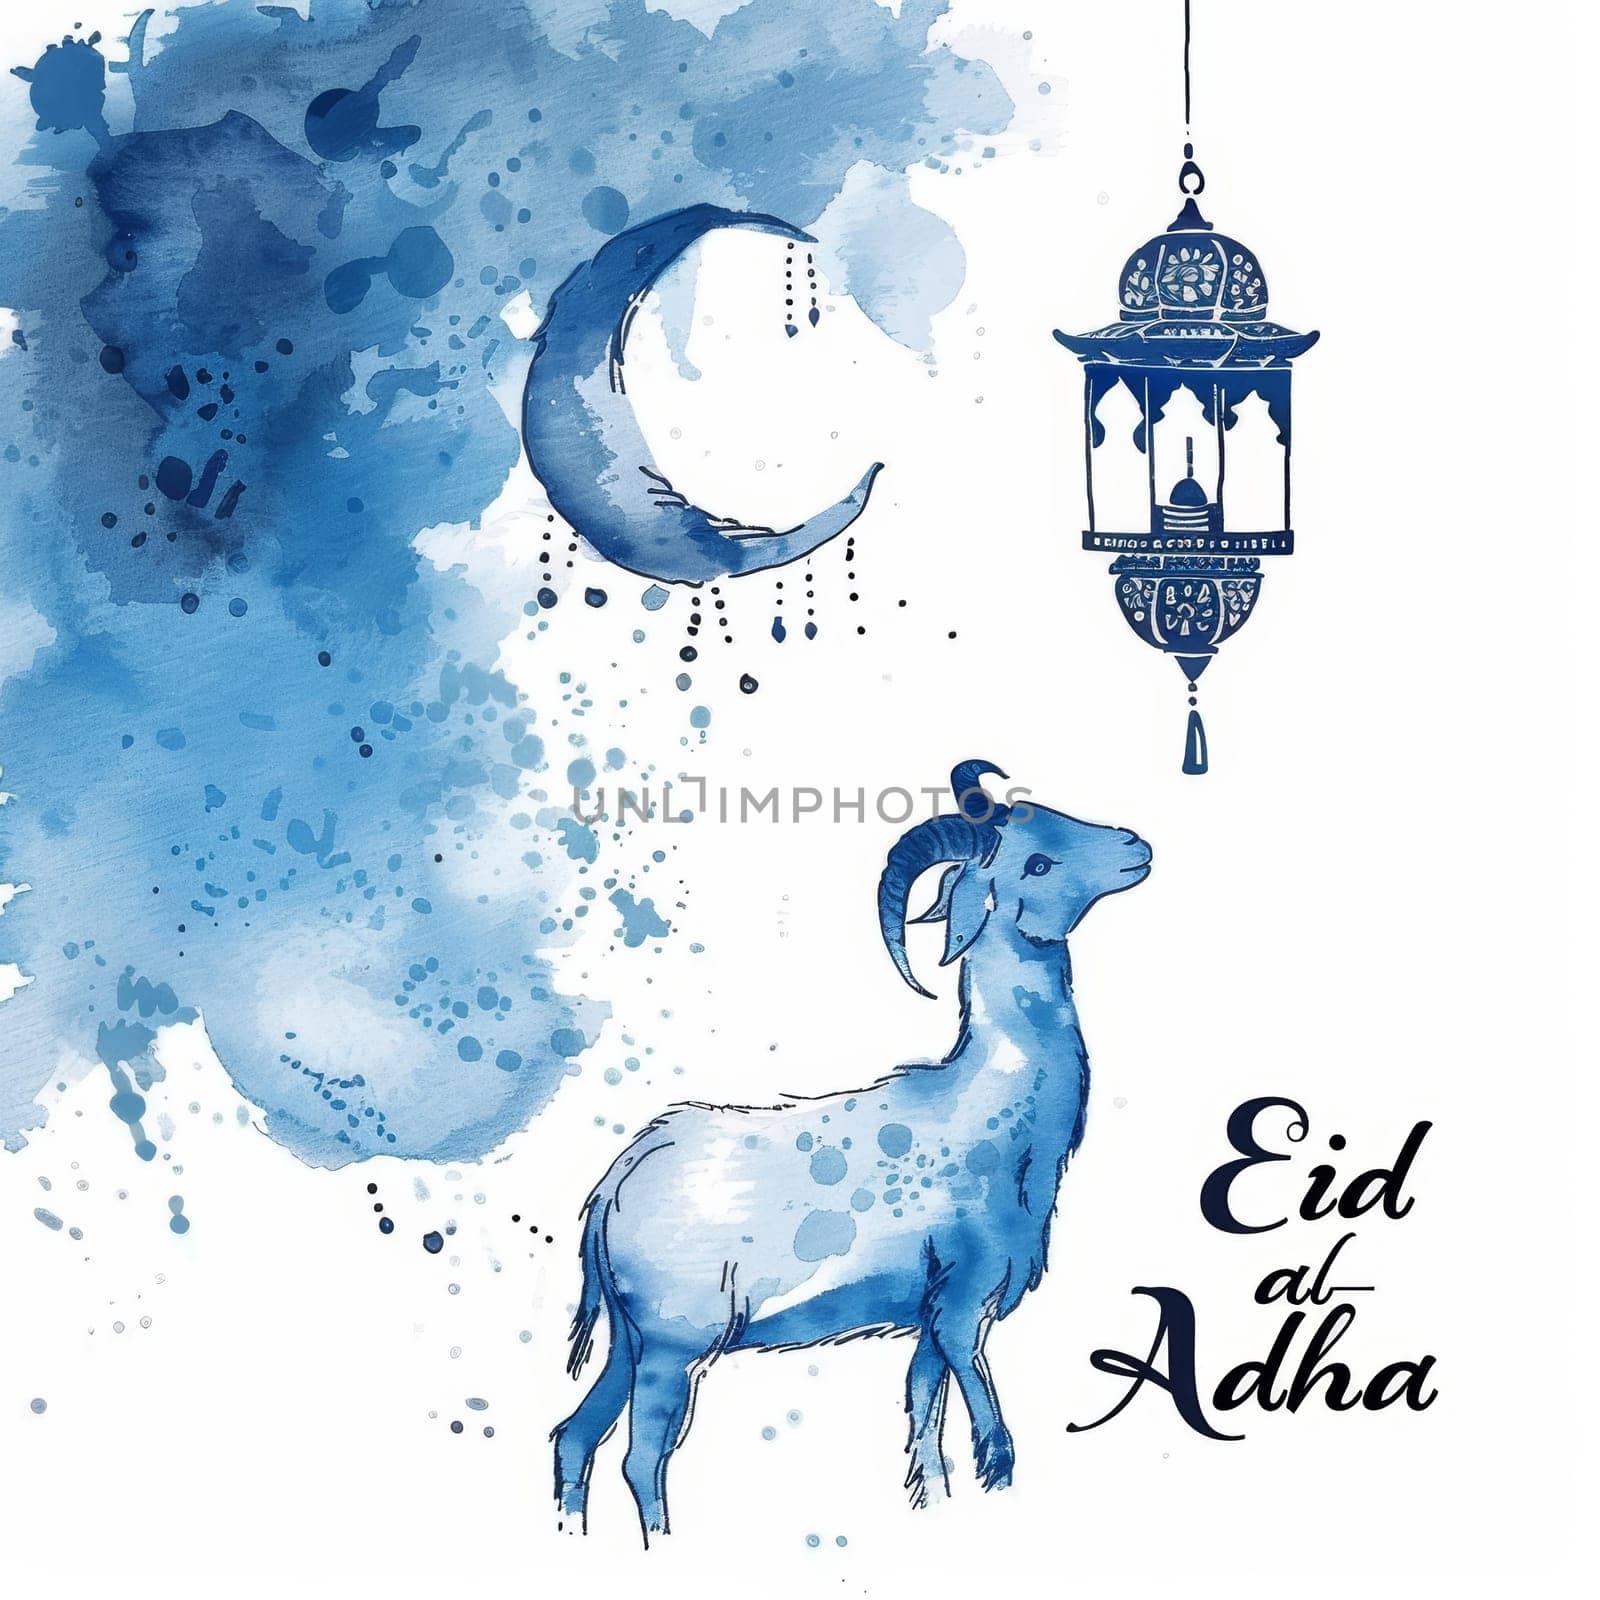 An artistic Eid al-Adha illustration in blue watercolor with a goat and hanging lantern, capturing the essence of the celebration. by sfinks